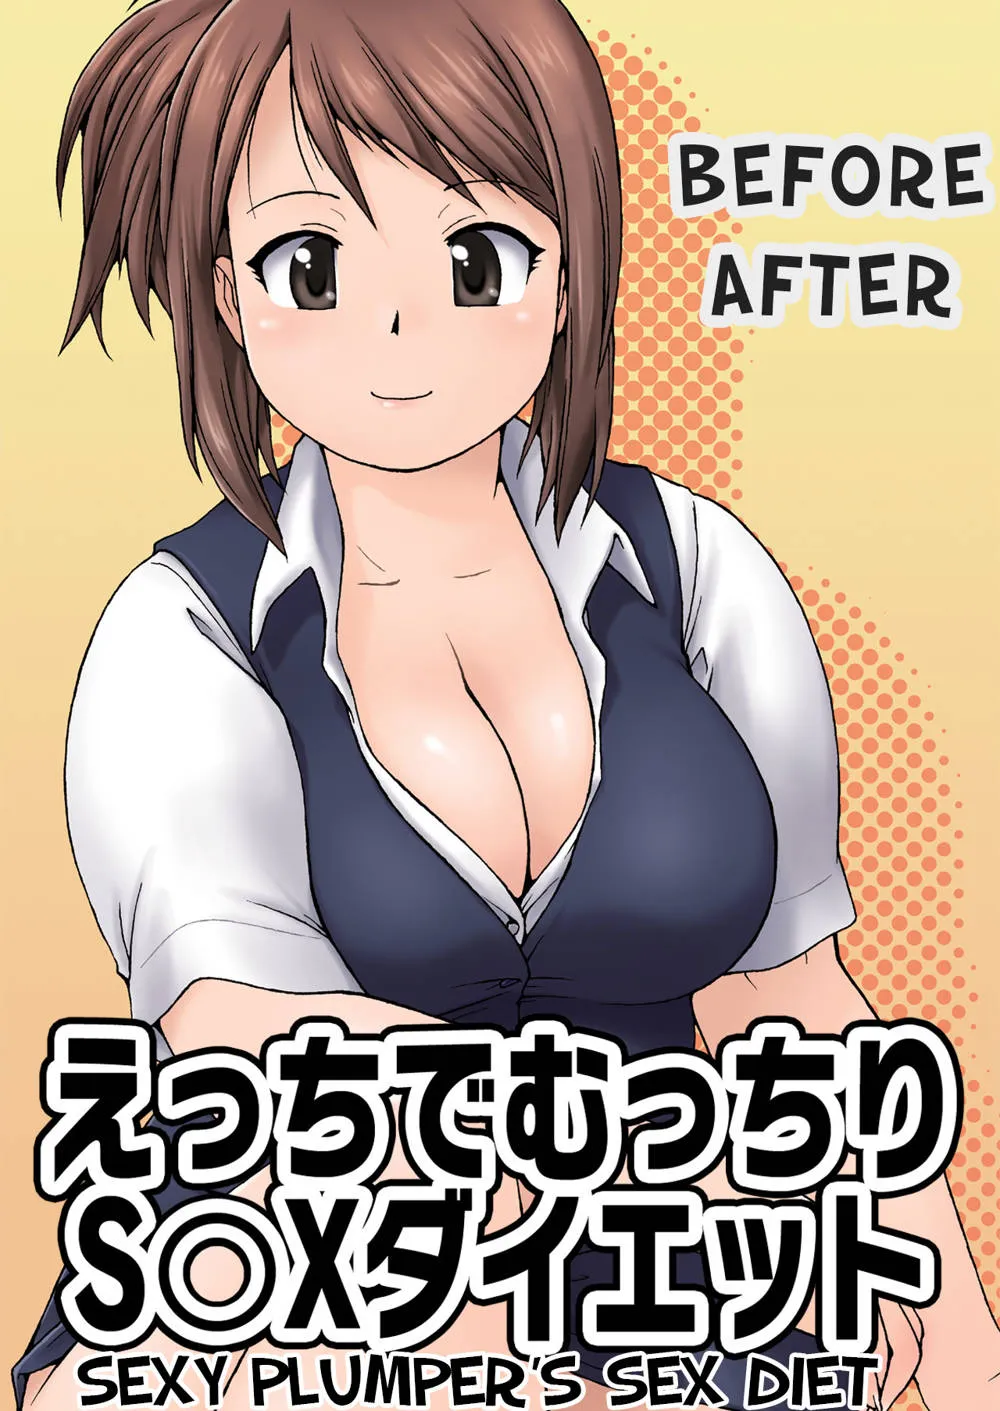 Original,Before After, Sexy Plumper's Sex Diet [English][第1页]